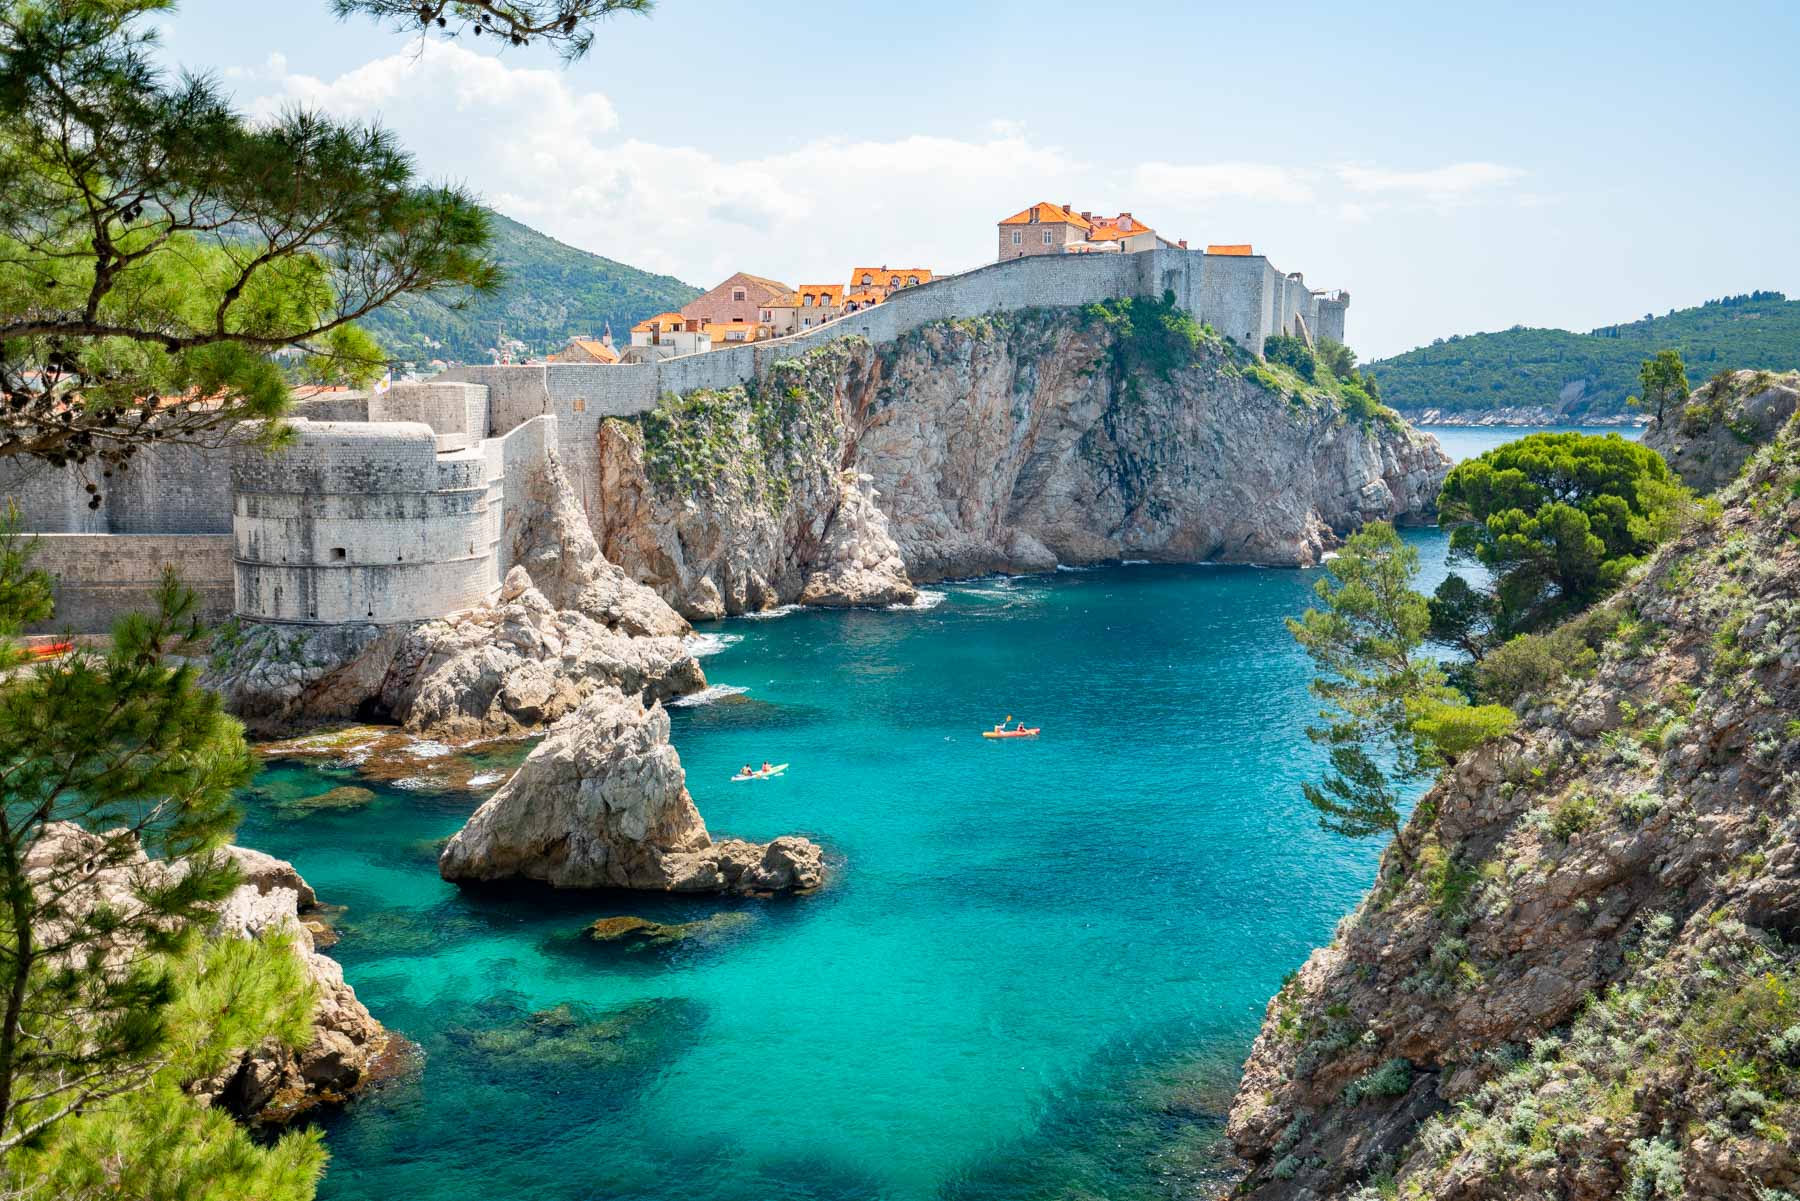 20 EPIC Things to Do in Dubrovnik (& No, It's Not Just Game of Thrones)